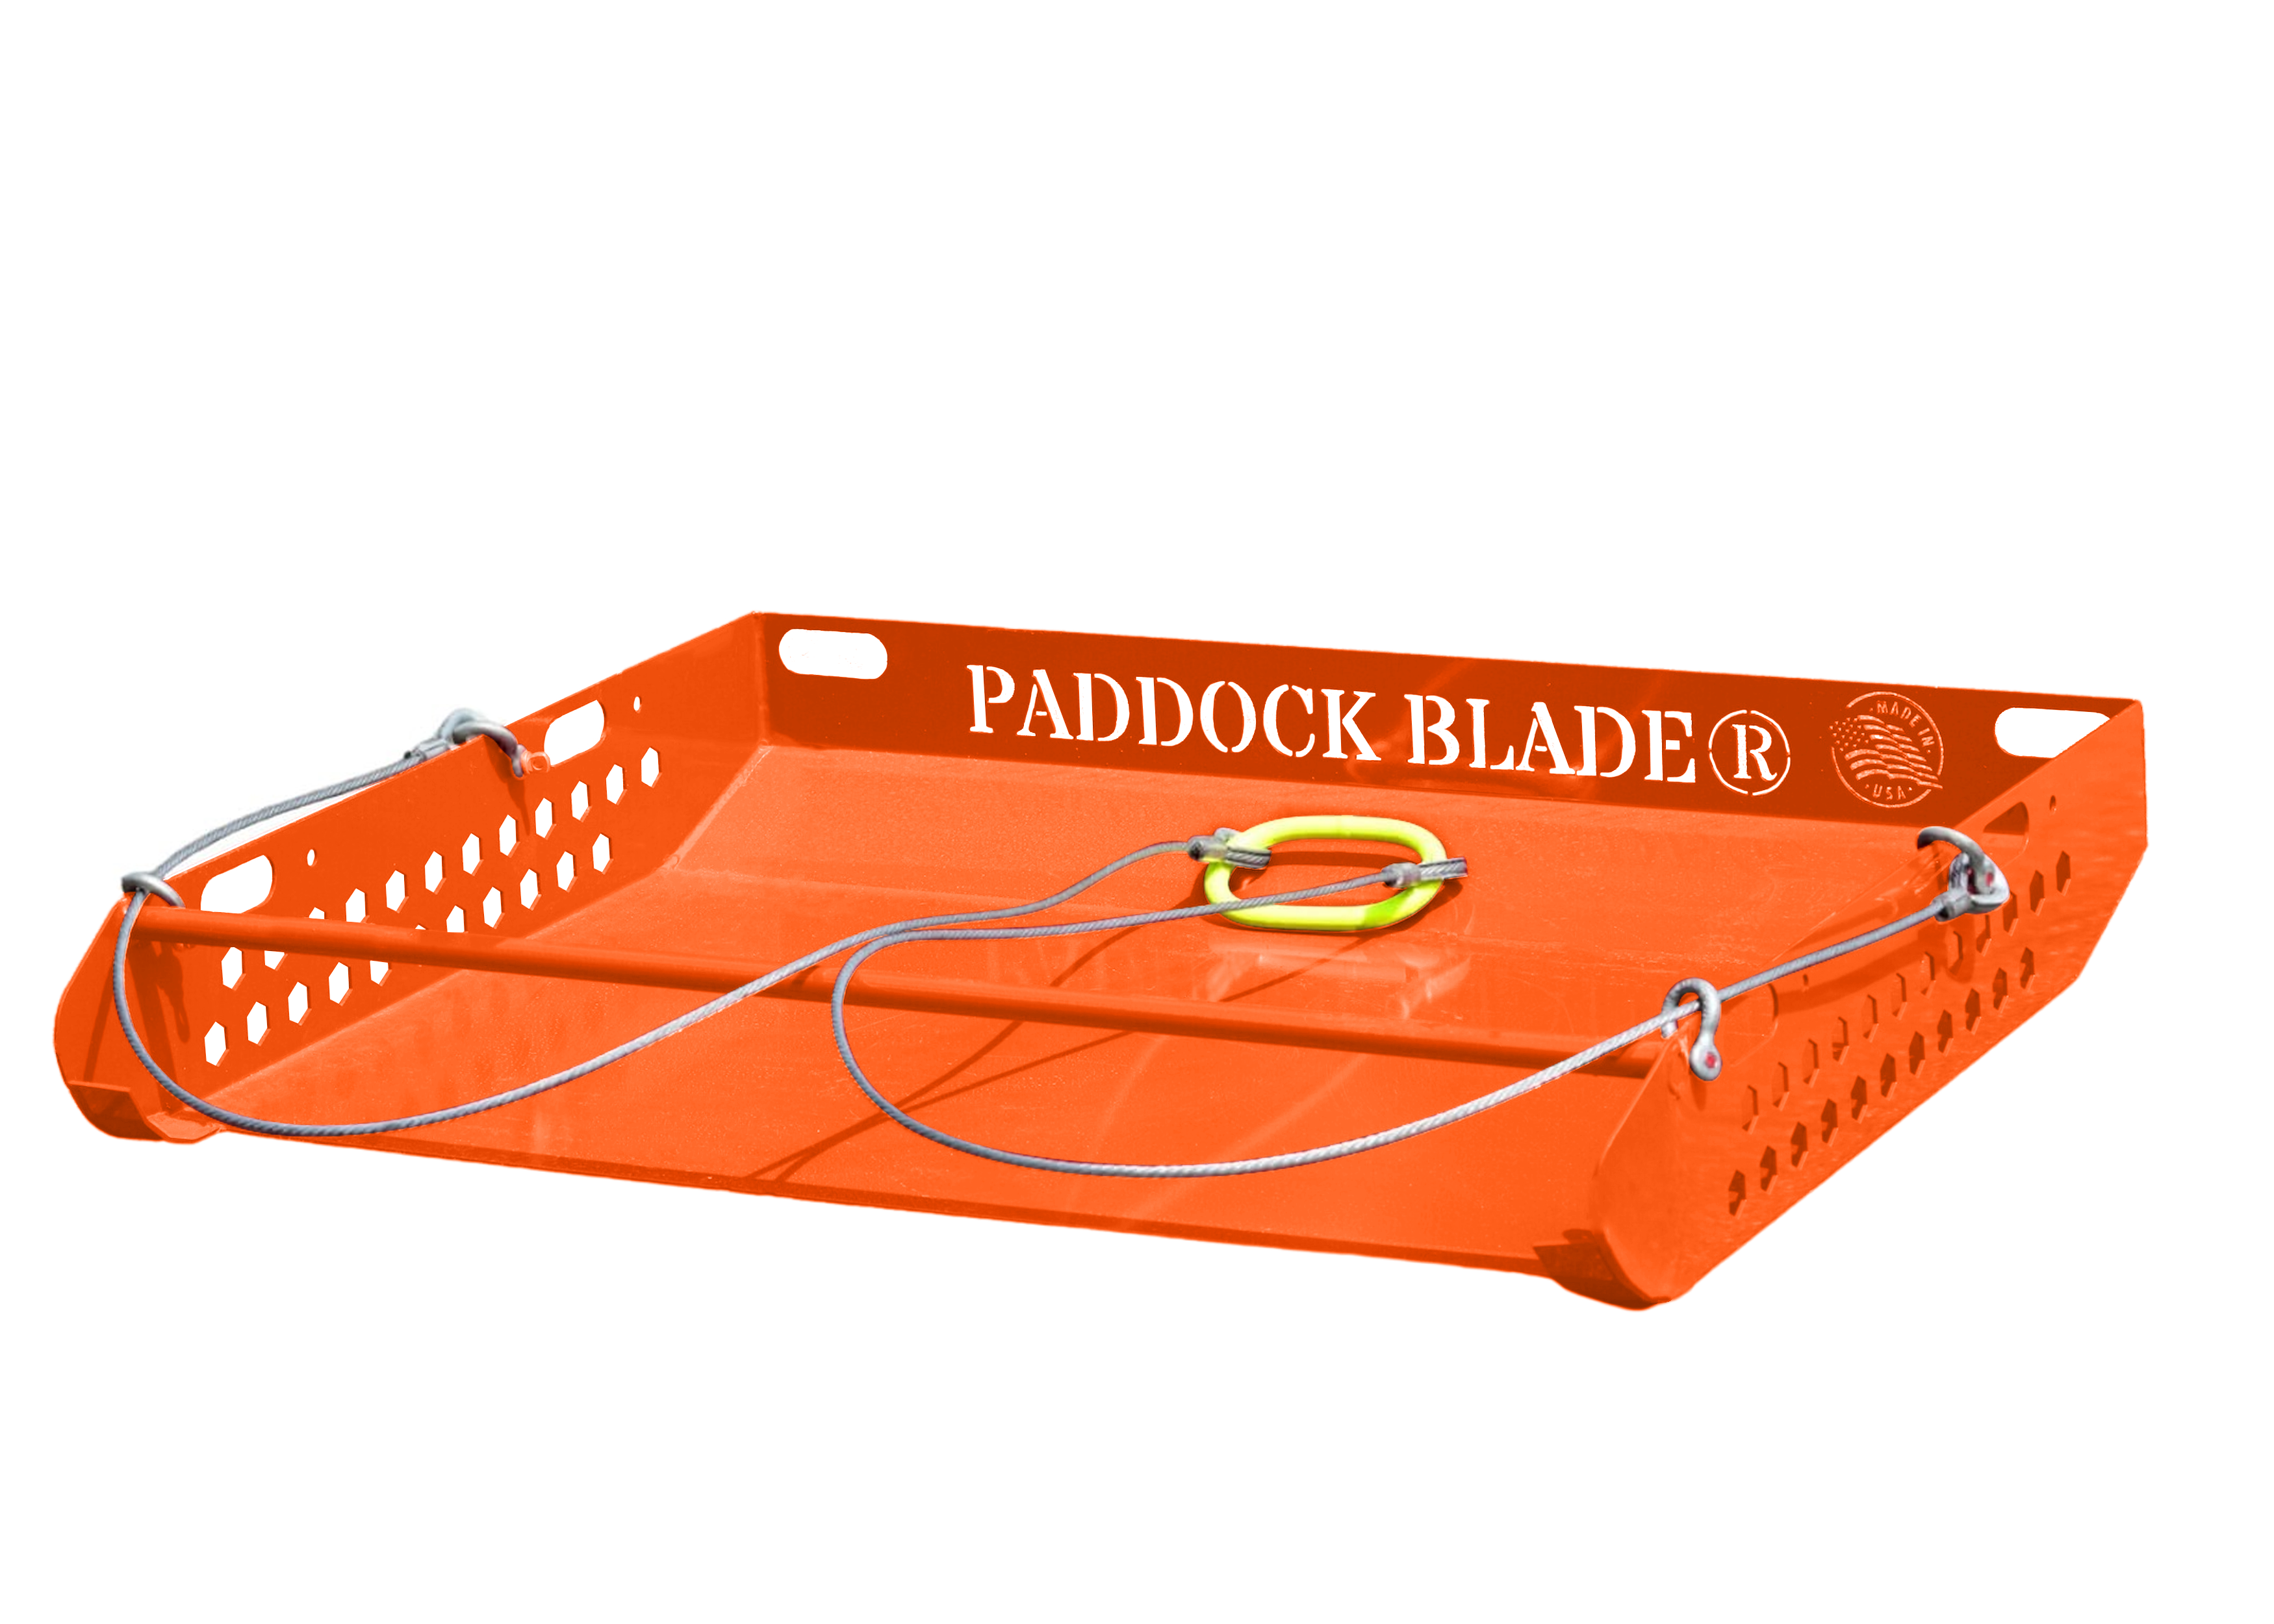 Paddock Blade Horse Paddock Cleaner | American Made | NEW LIMITED EDITION (Burnt Orange) | FREE Delivery